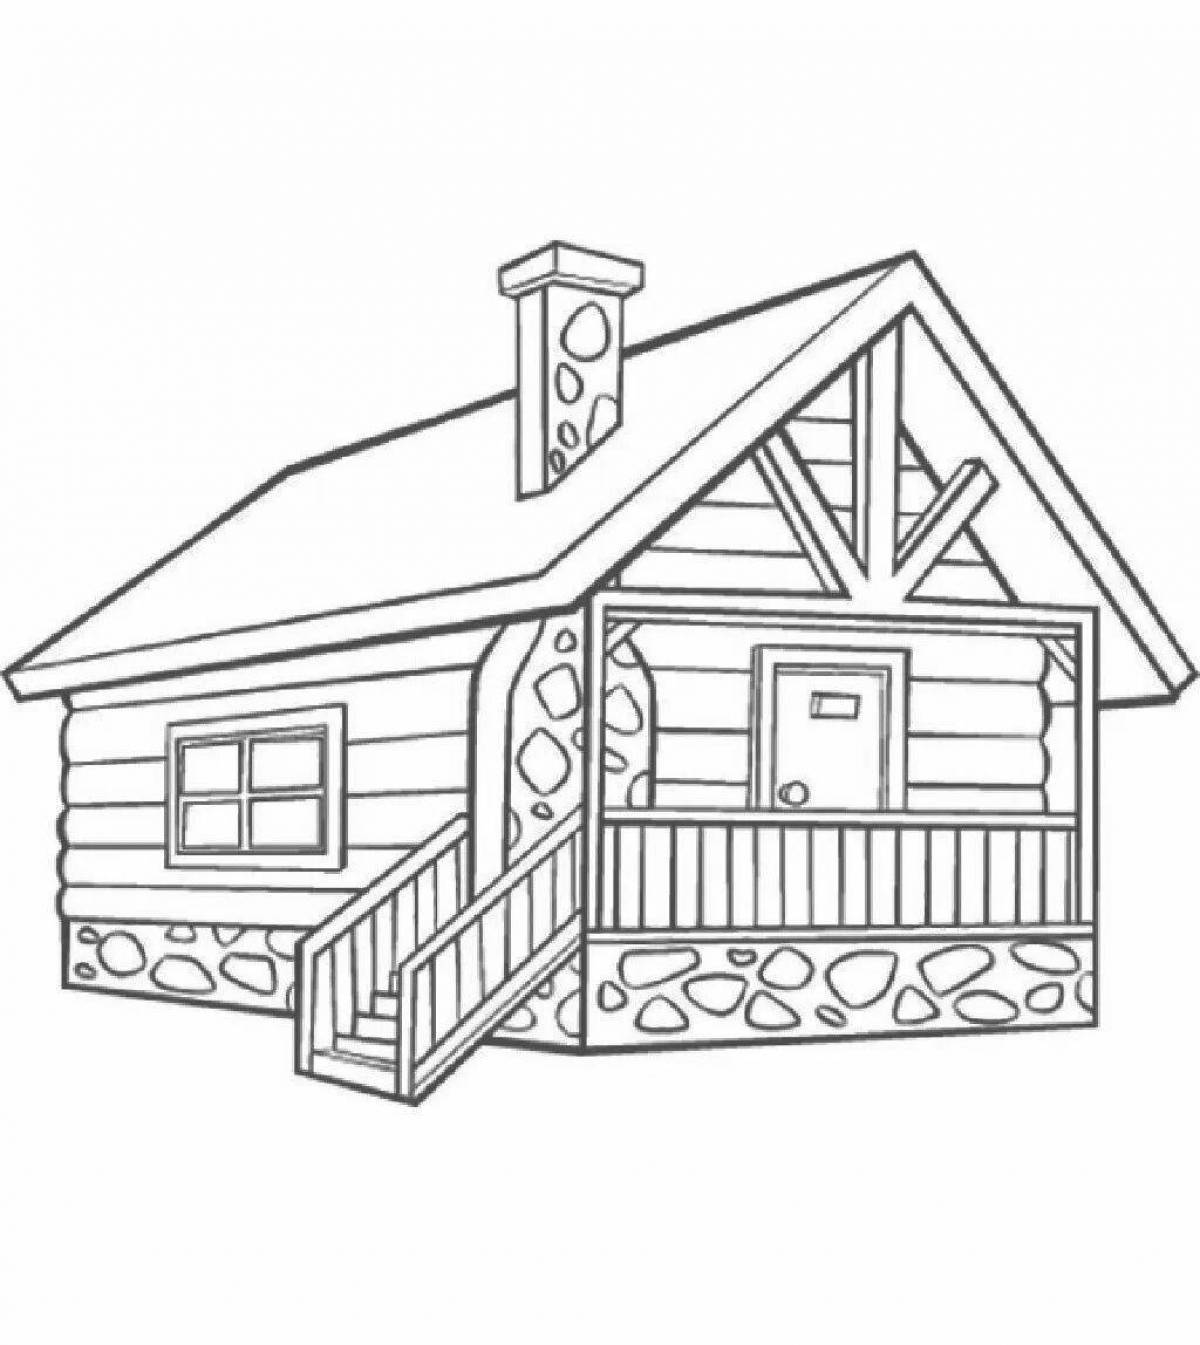 Coloring hut for kids